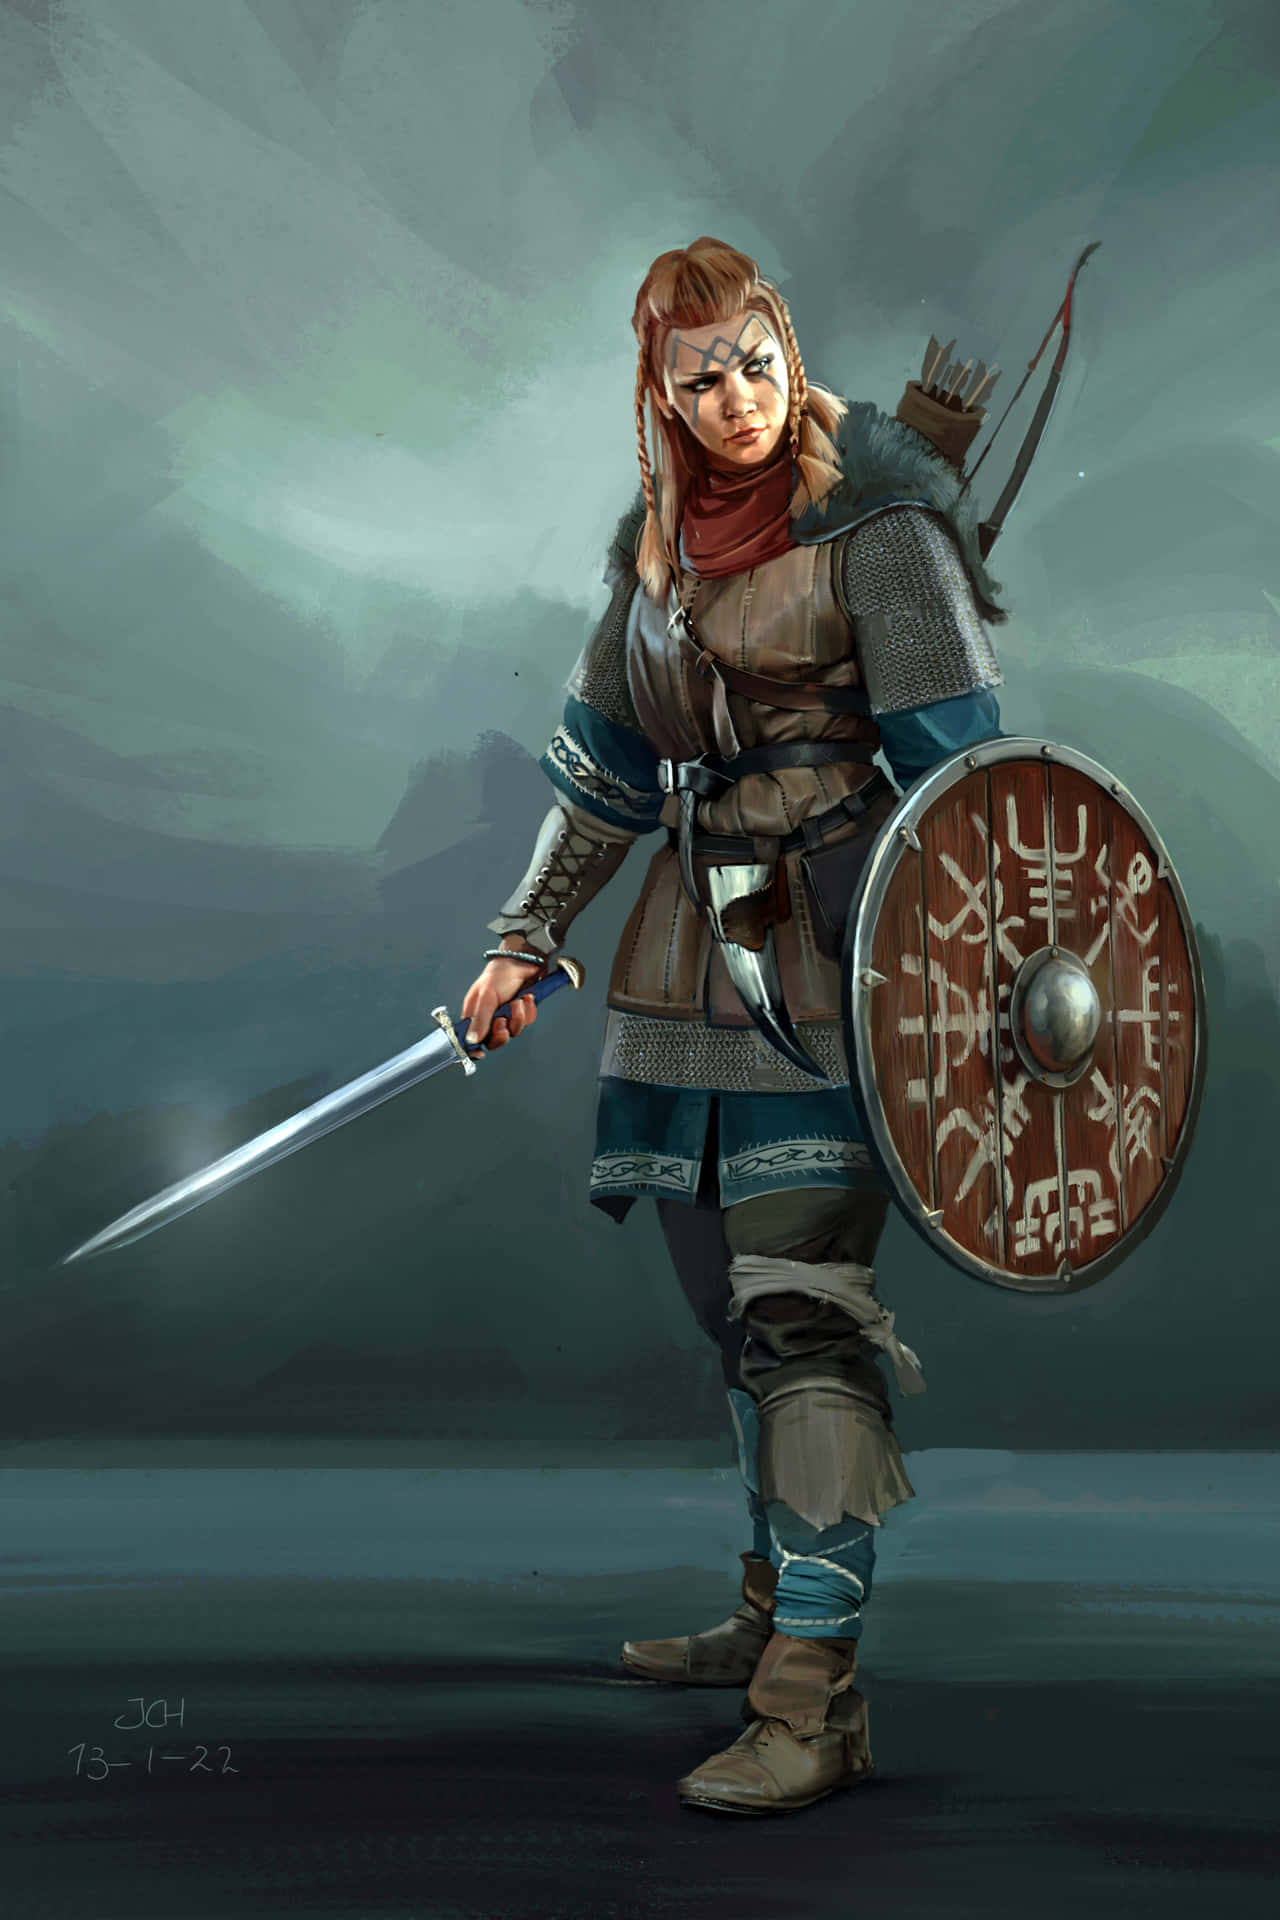 "A formidable force of female Viking Warriors marches onward, ready to defend their home"